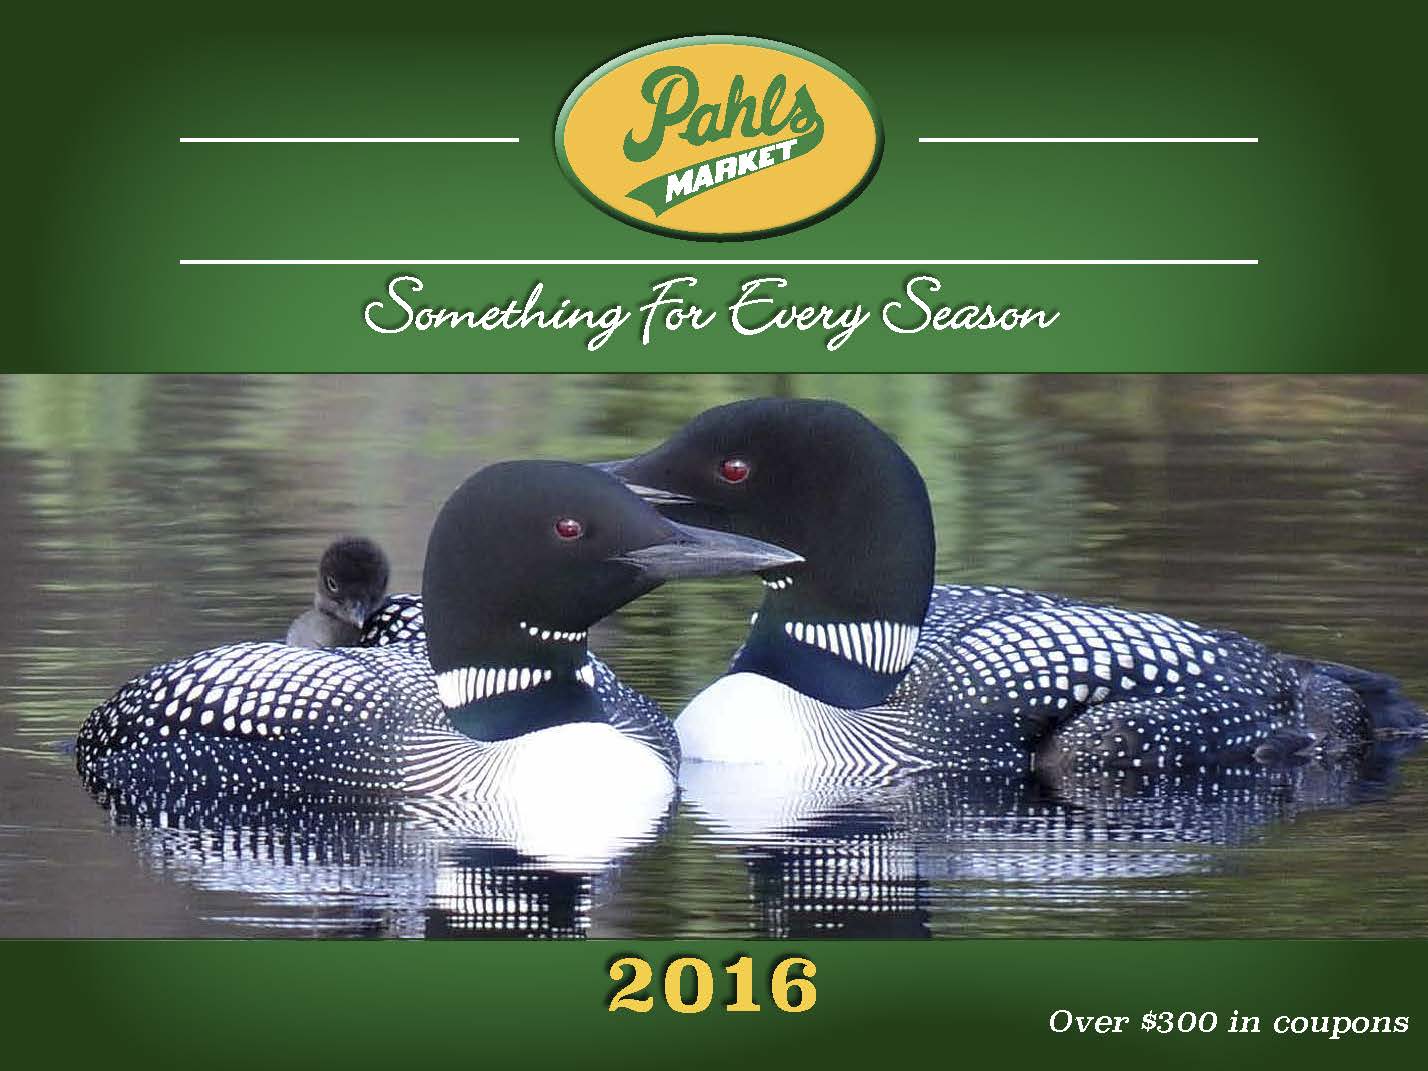 Pahl’s Annual “Something for Every Season” Photo Contest